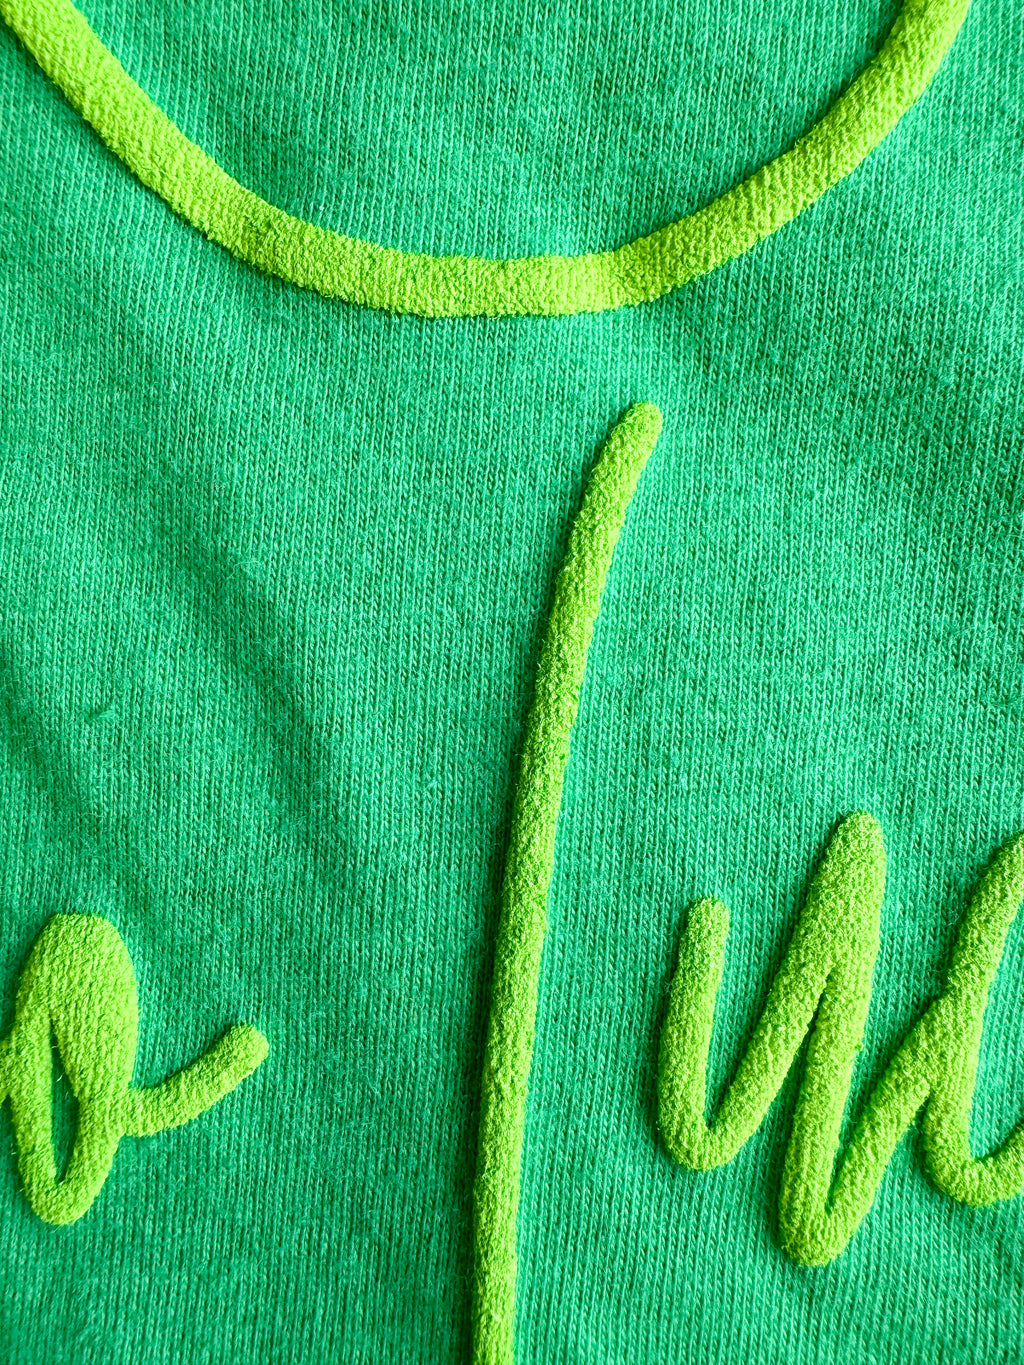 Happy Go Lucky (Lime Puff Ink) Green Tee